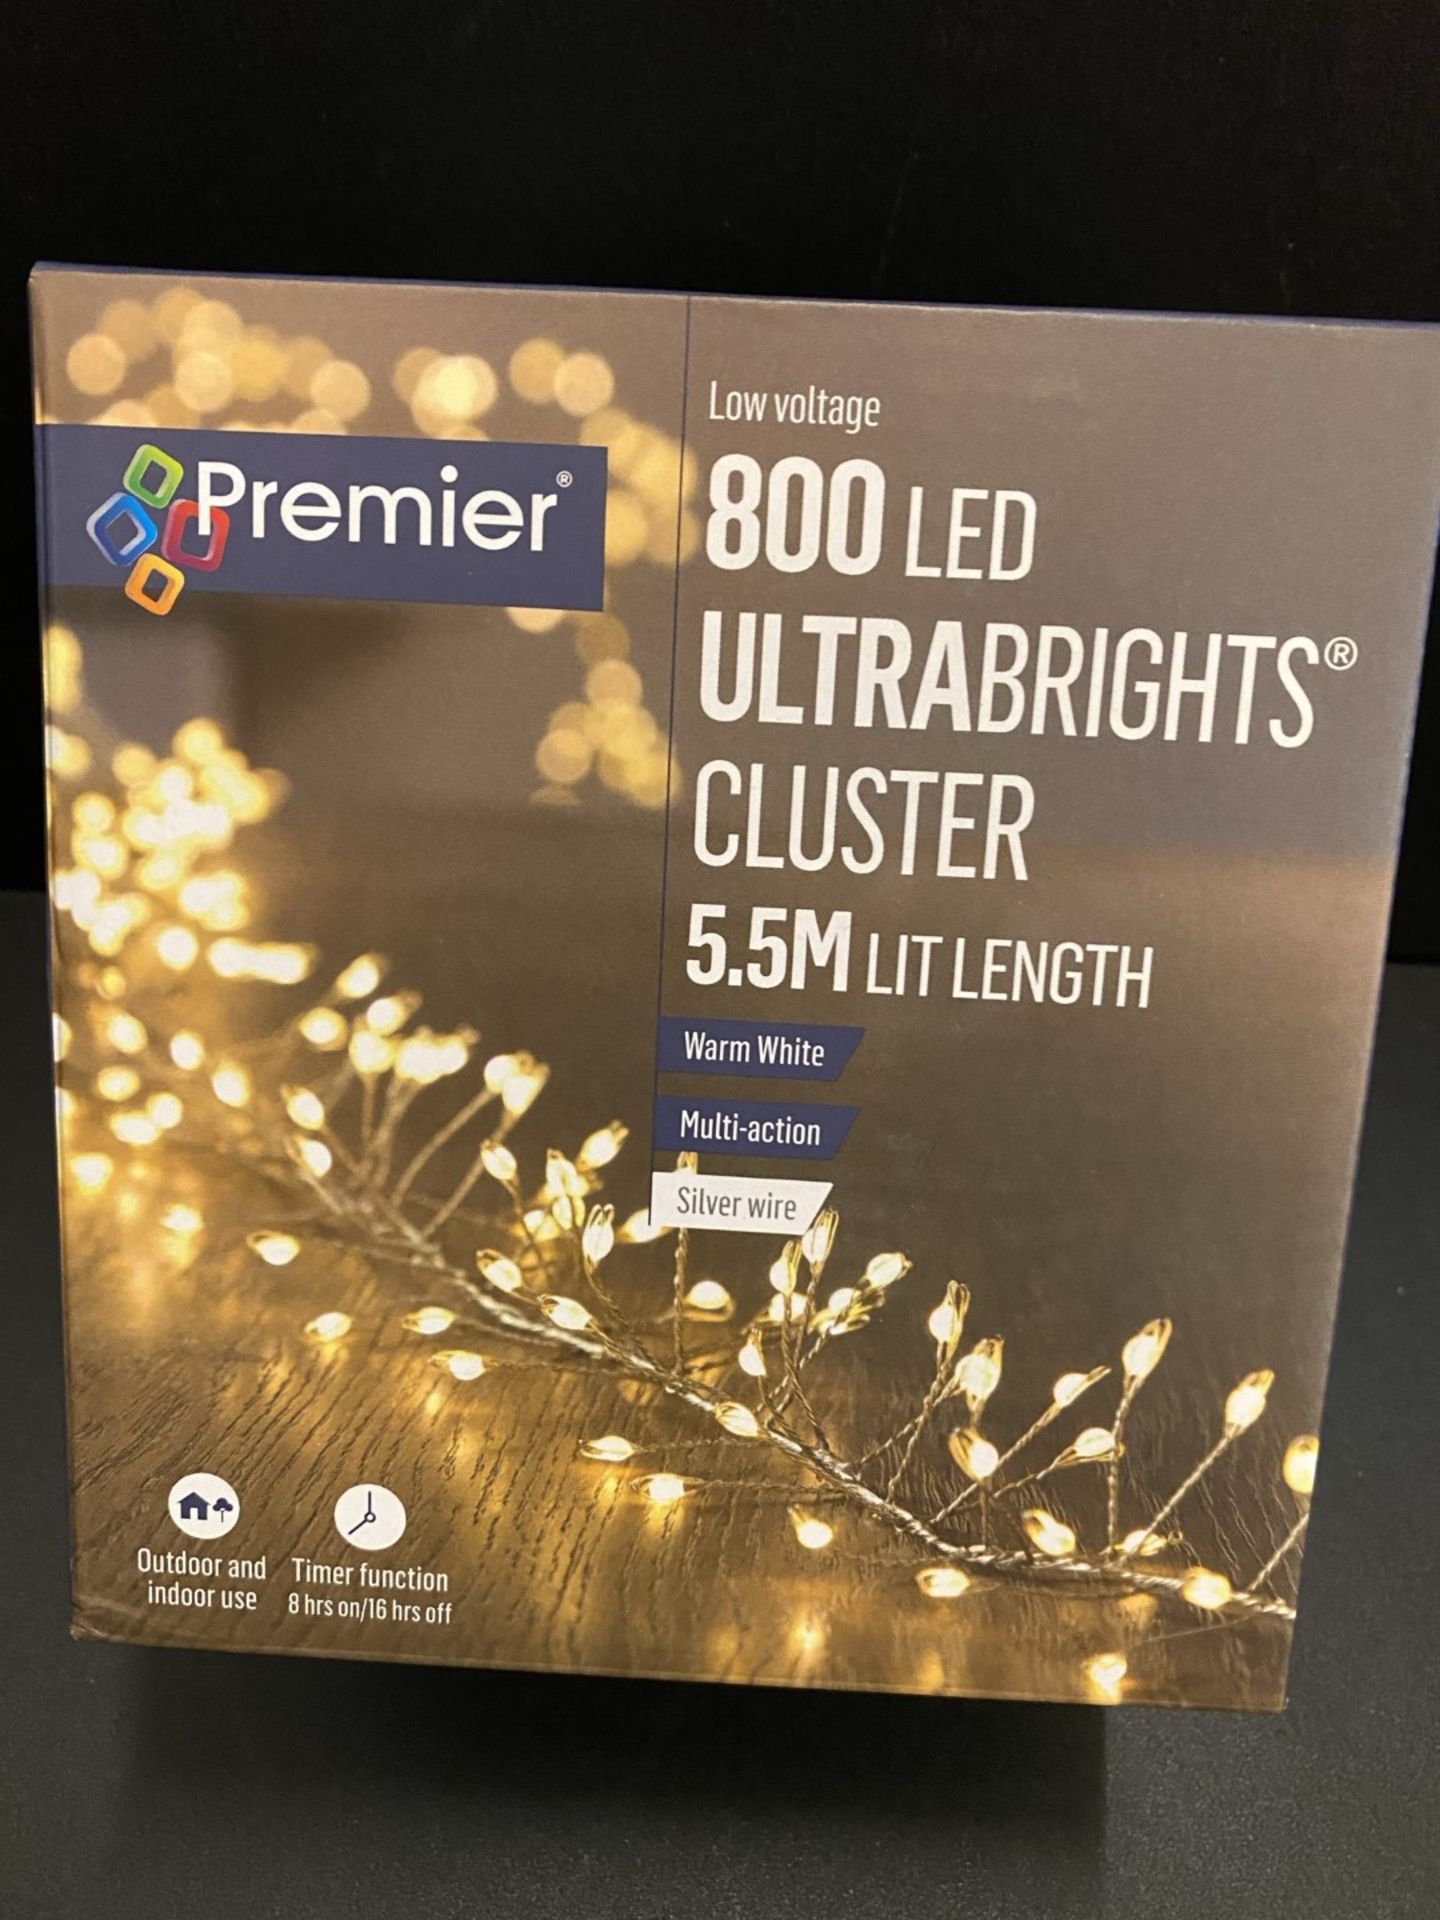 5.5m Ultrabrights Door Garland 800 LEDs in Warm White by Premier - Image 2 of 2